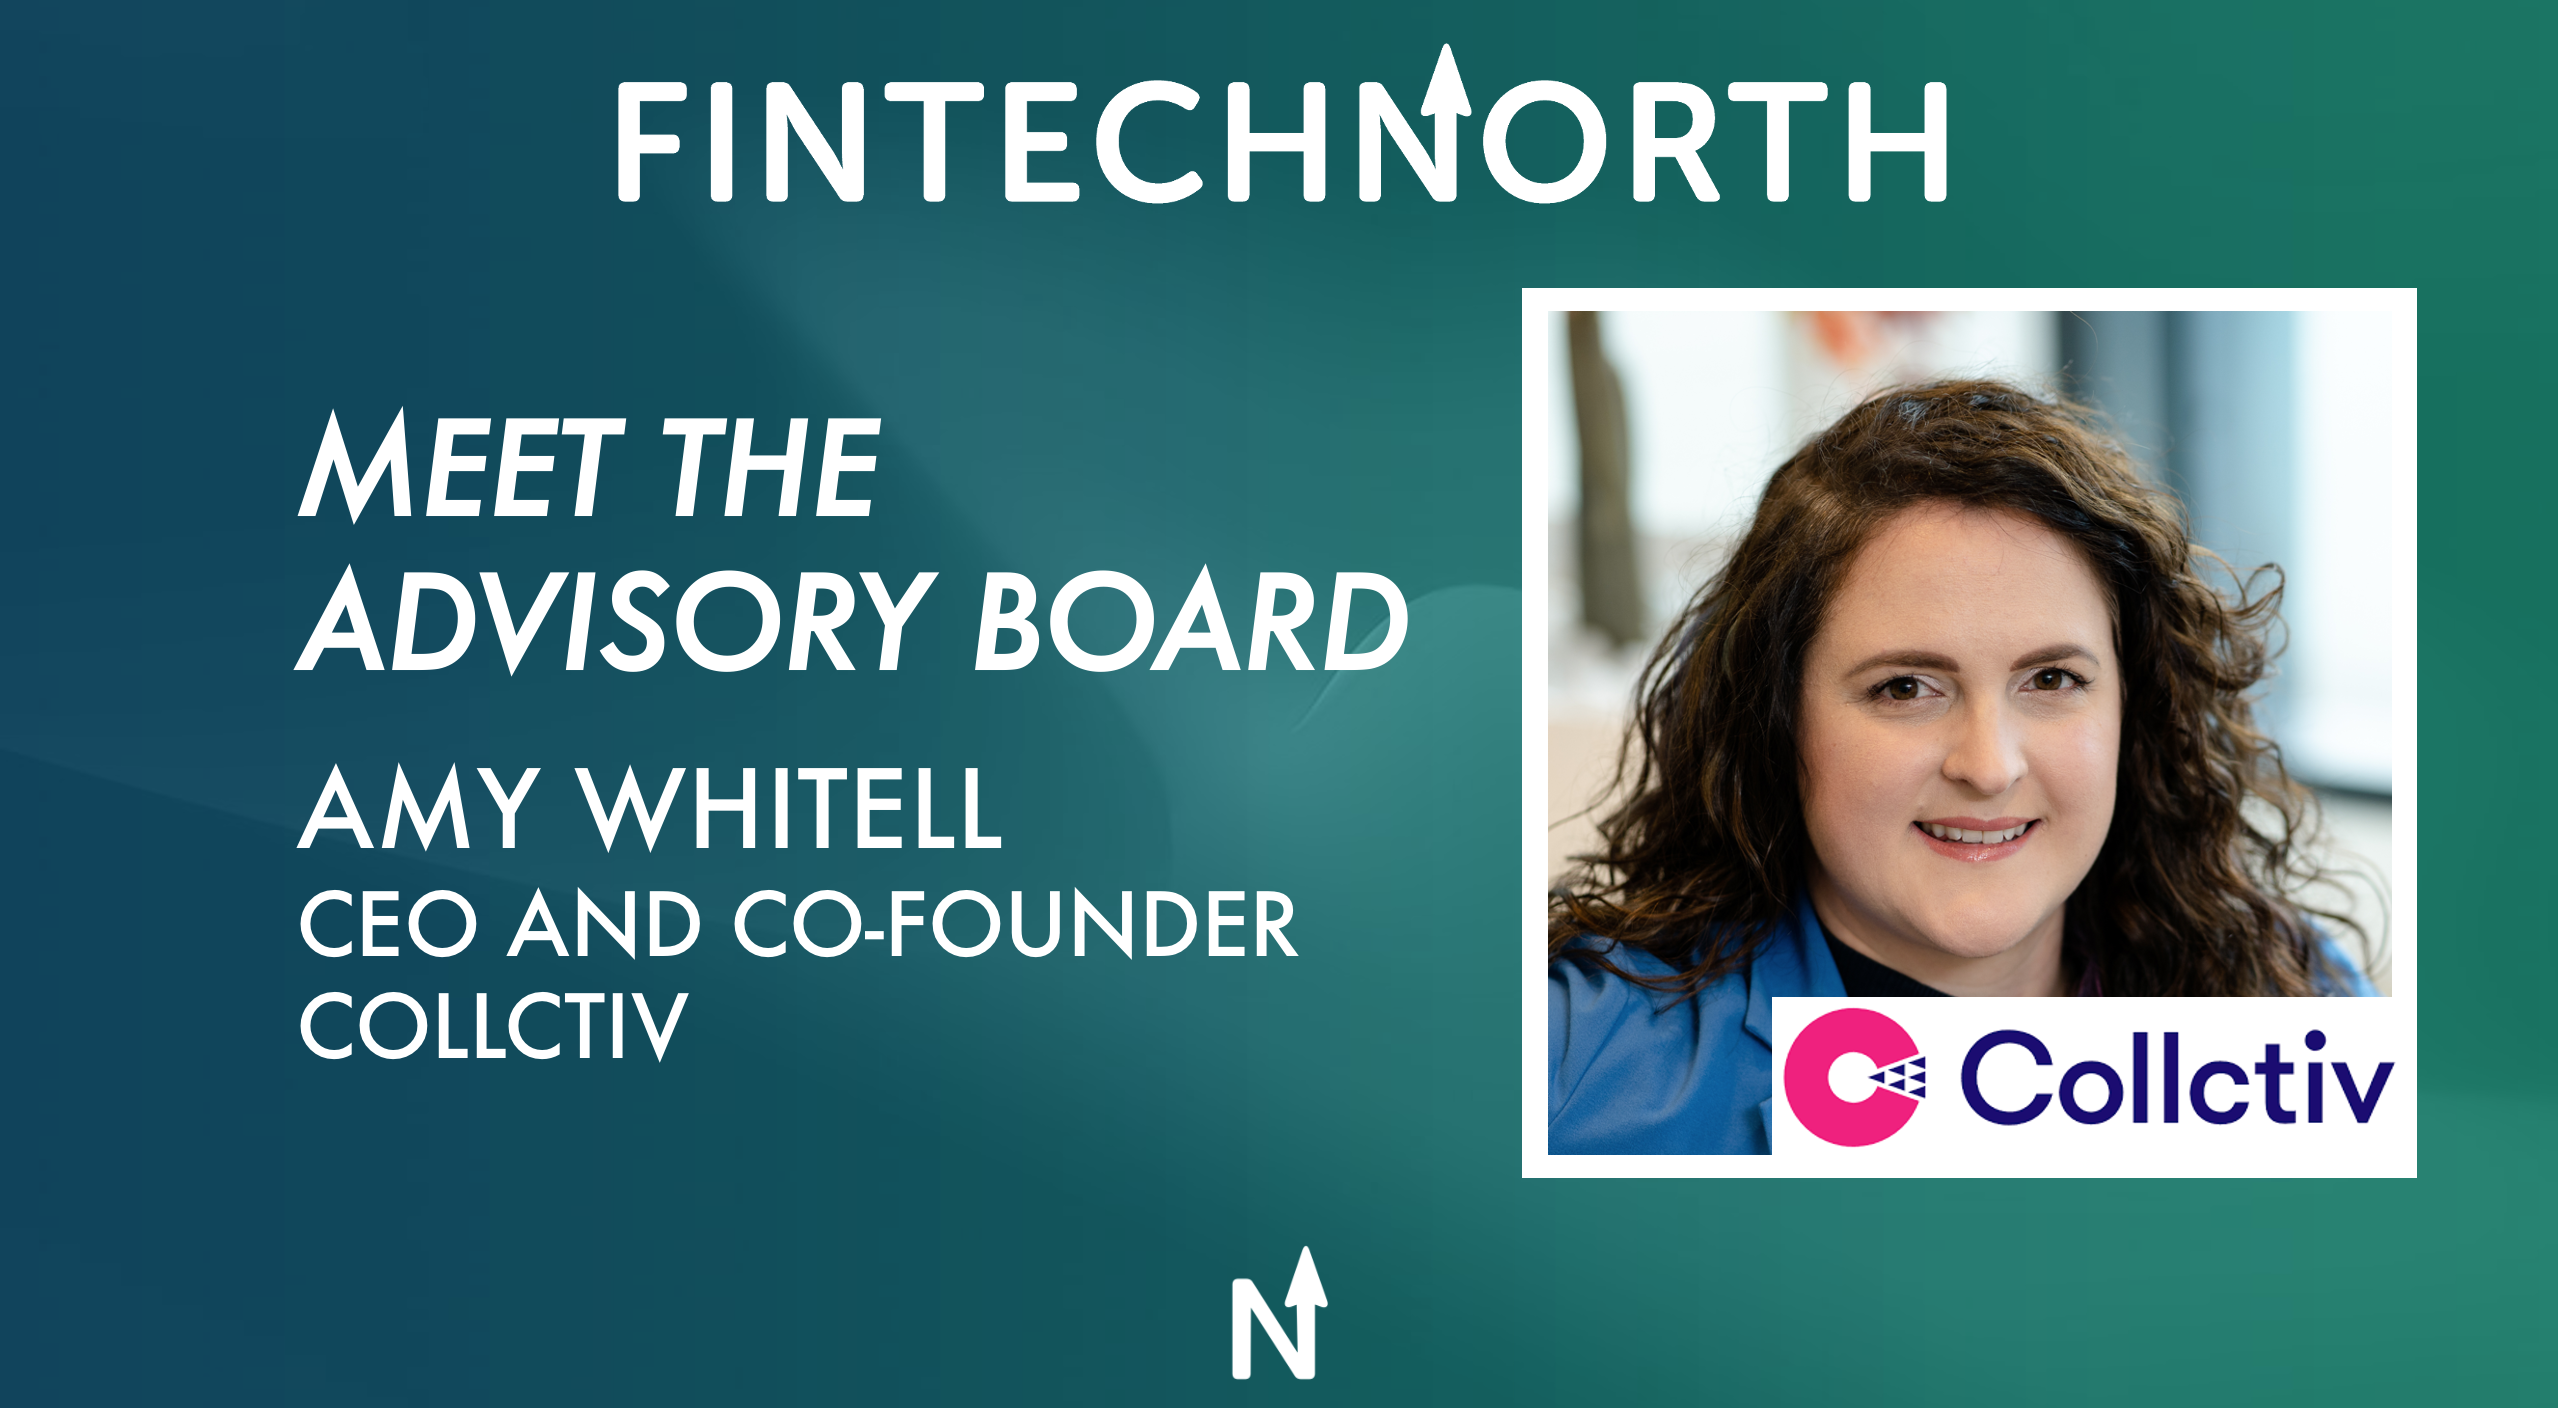 Meet the Advisory Board: Amy Whitell, CEO and Co-Founder, Collctiv